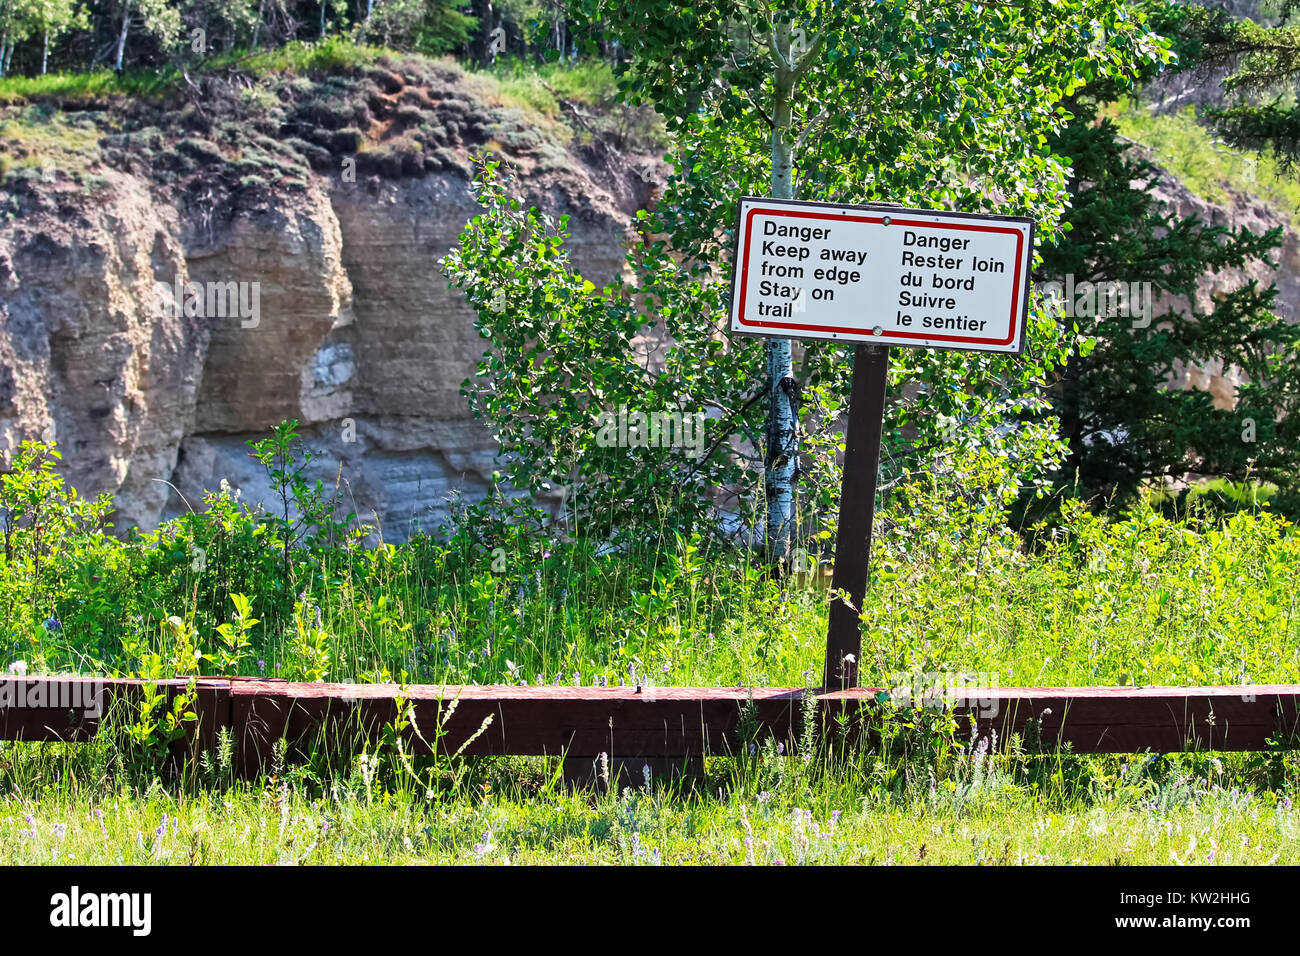 Danger keep away from edge stay on trail sign. Stock Photo